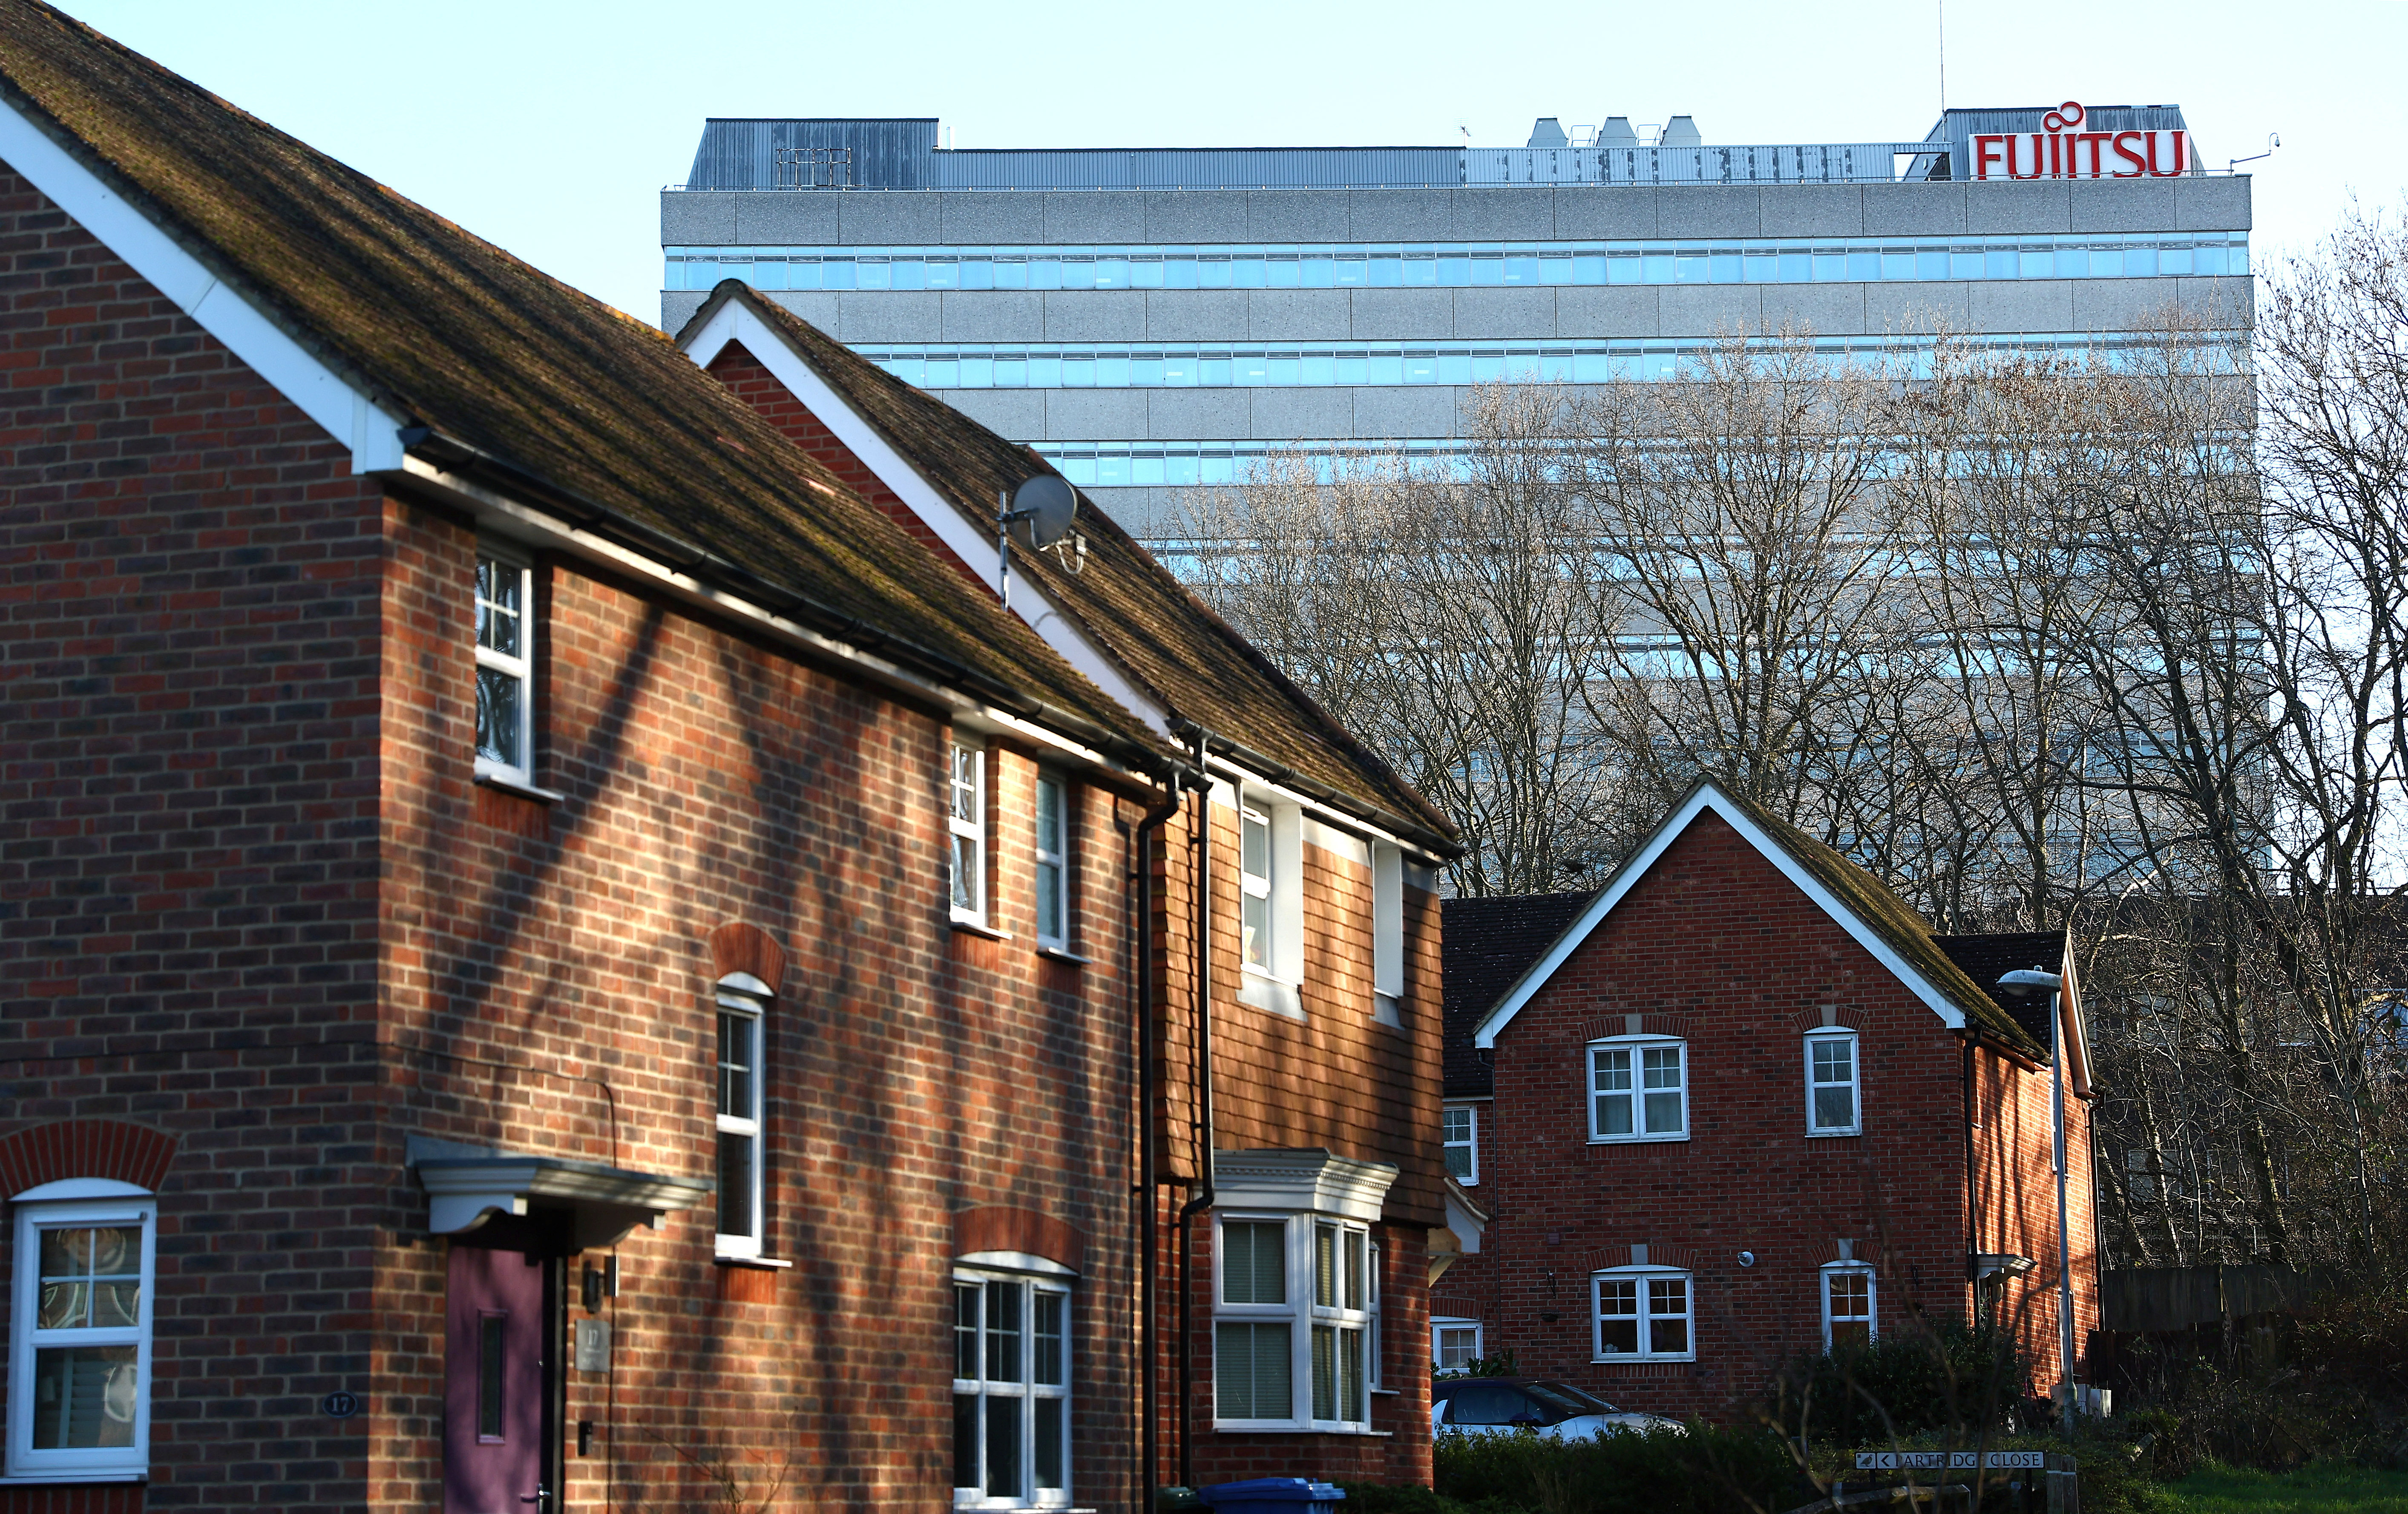 The Head Office of Fujitsu Services is seen close to a residential area in Bracknell